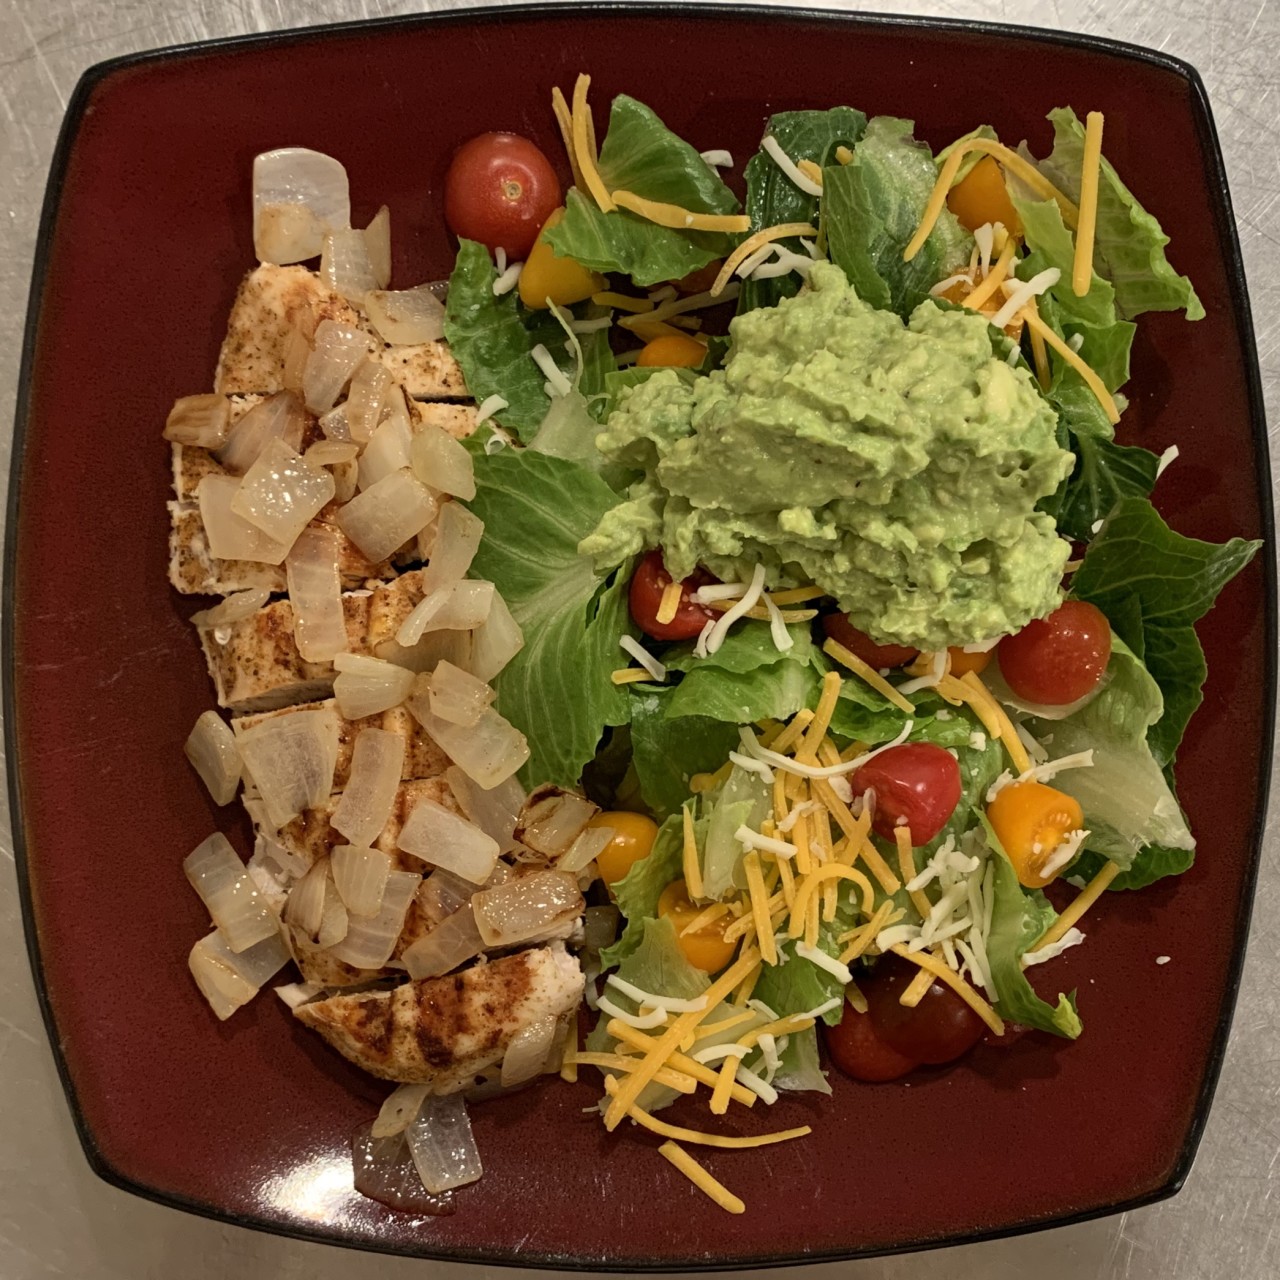 <a class="bx-tag" rel="tag" href="https://streetloc.com/view-channel-profile/whatsfordinner"><s>#</s><b>whatsfordinner</b></a> Grilled Chicken Sautéed Onions, Large Salad with fresh mashed Avocado